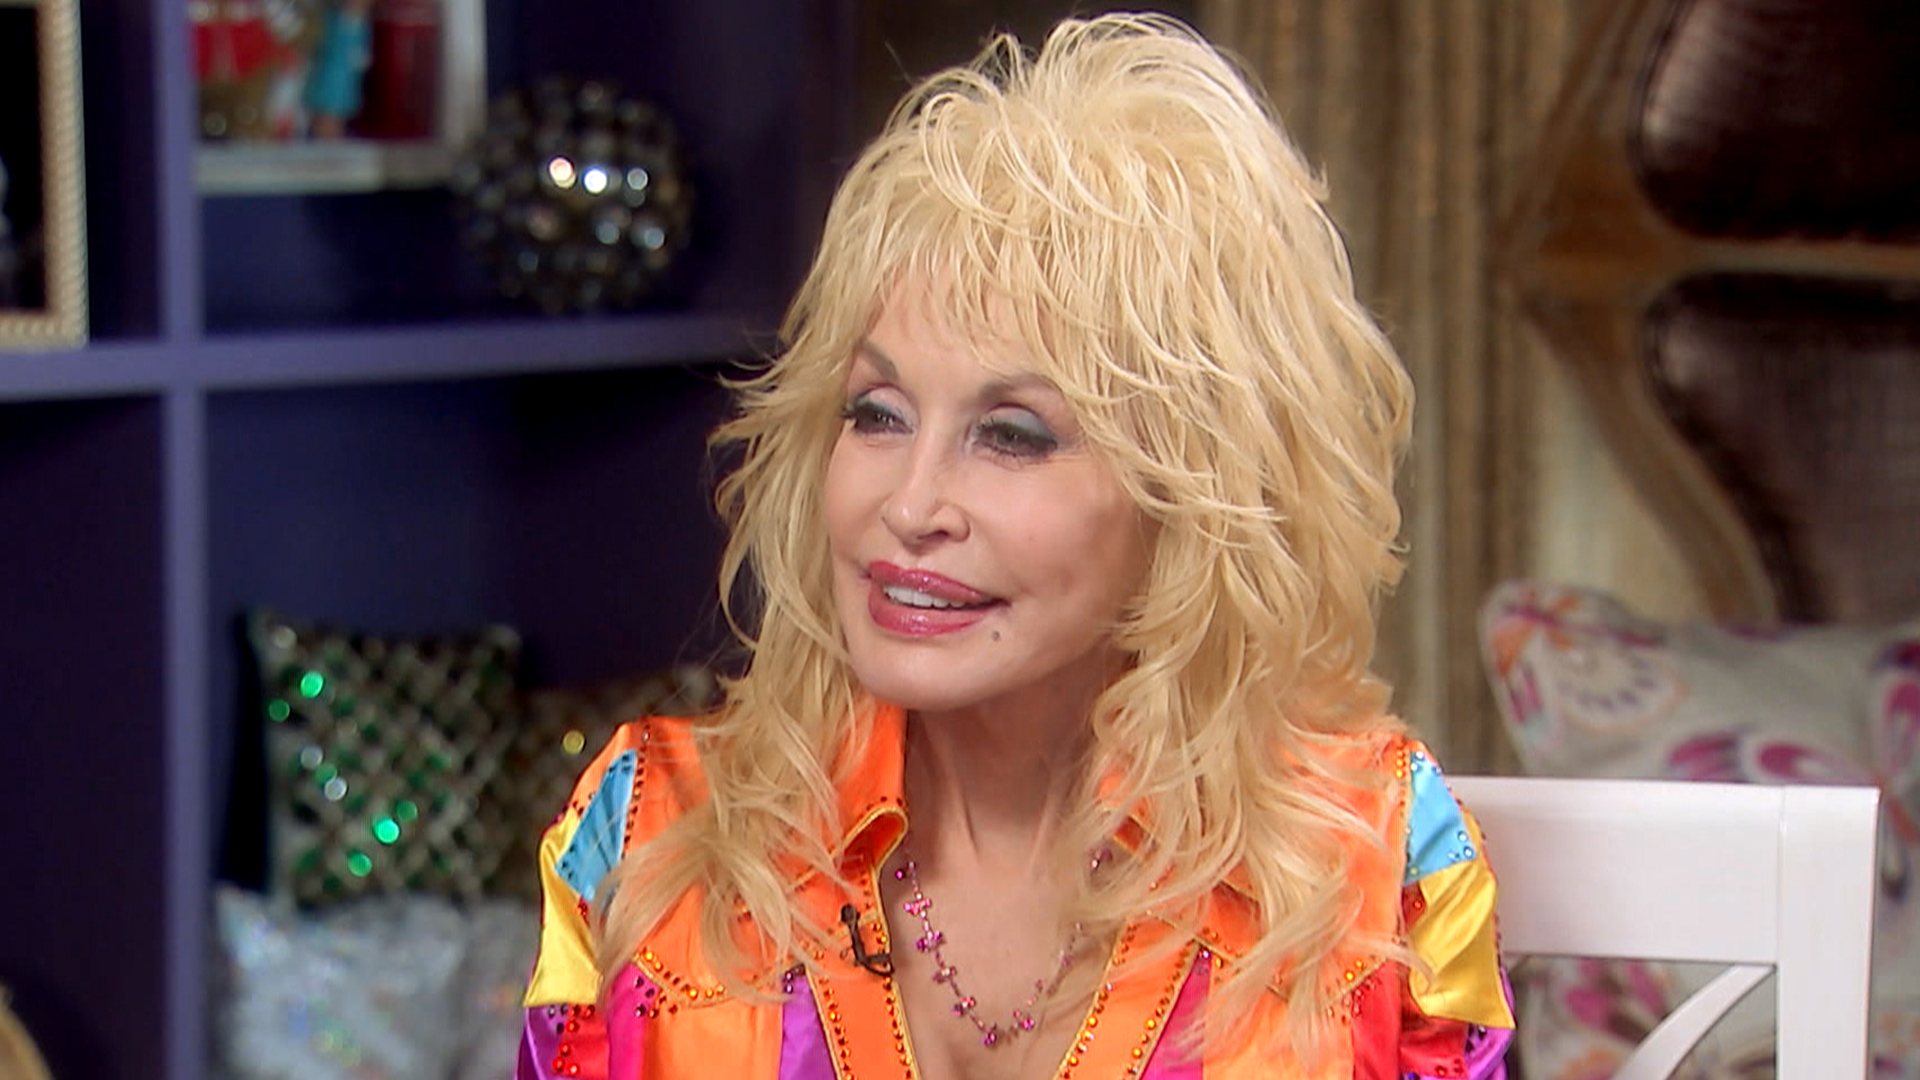 Dolly Parton on ‘Coat of Many Colors’: ‘I’ve been very blessed’ - TODAY.com